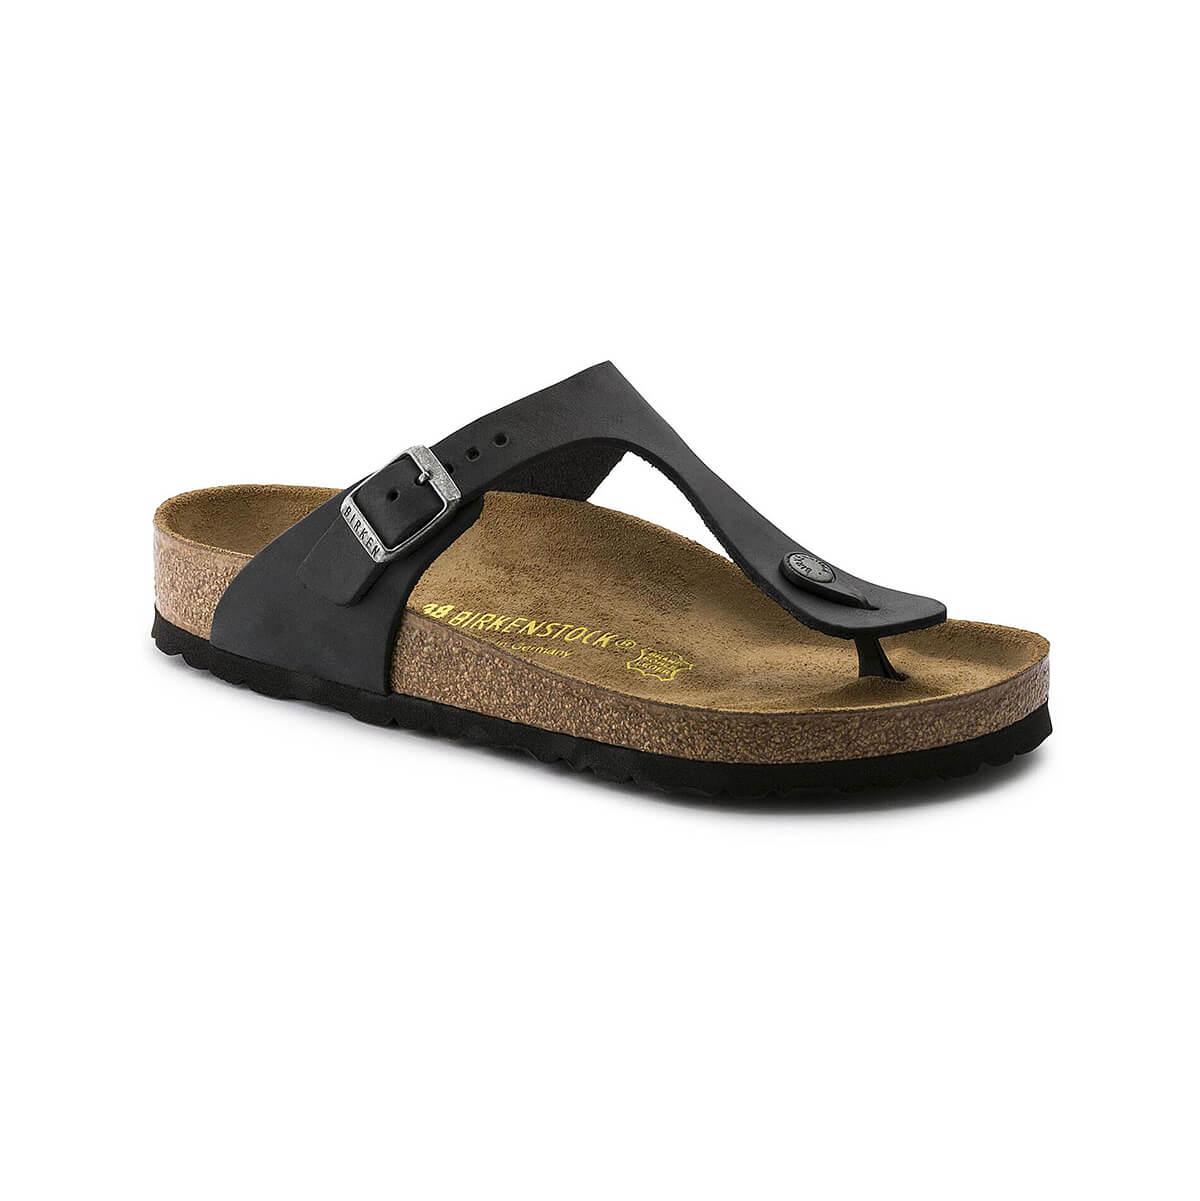  Women's Gizeh Oiled Leather Sandals